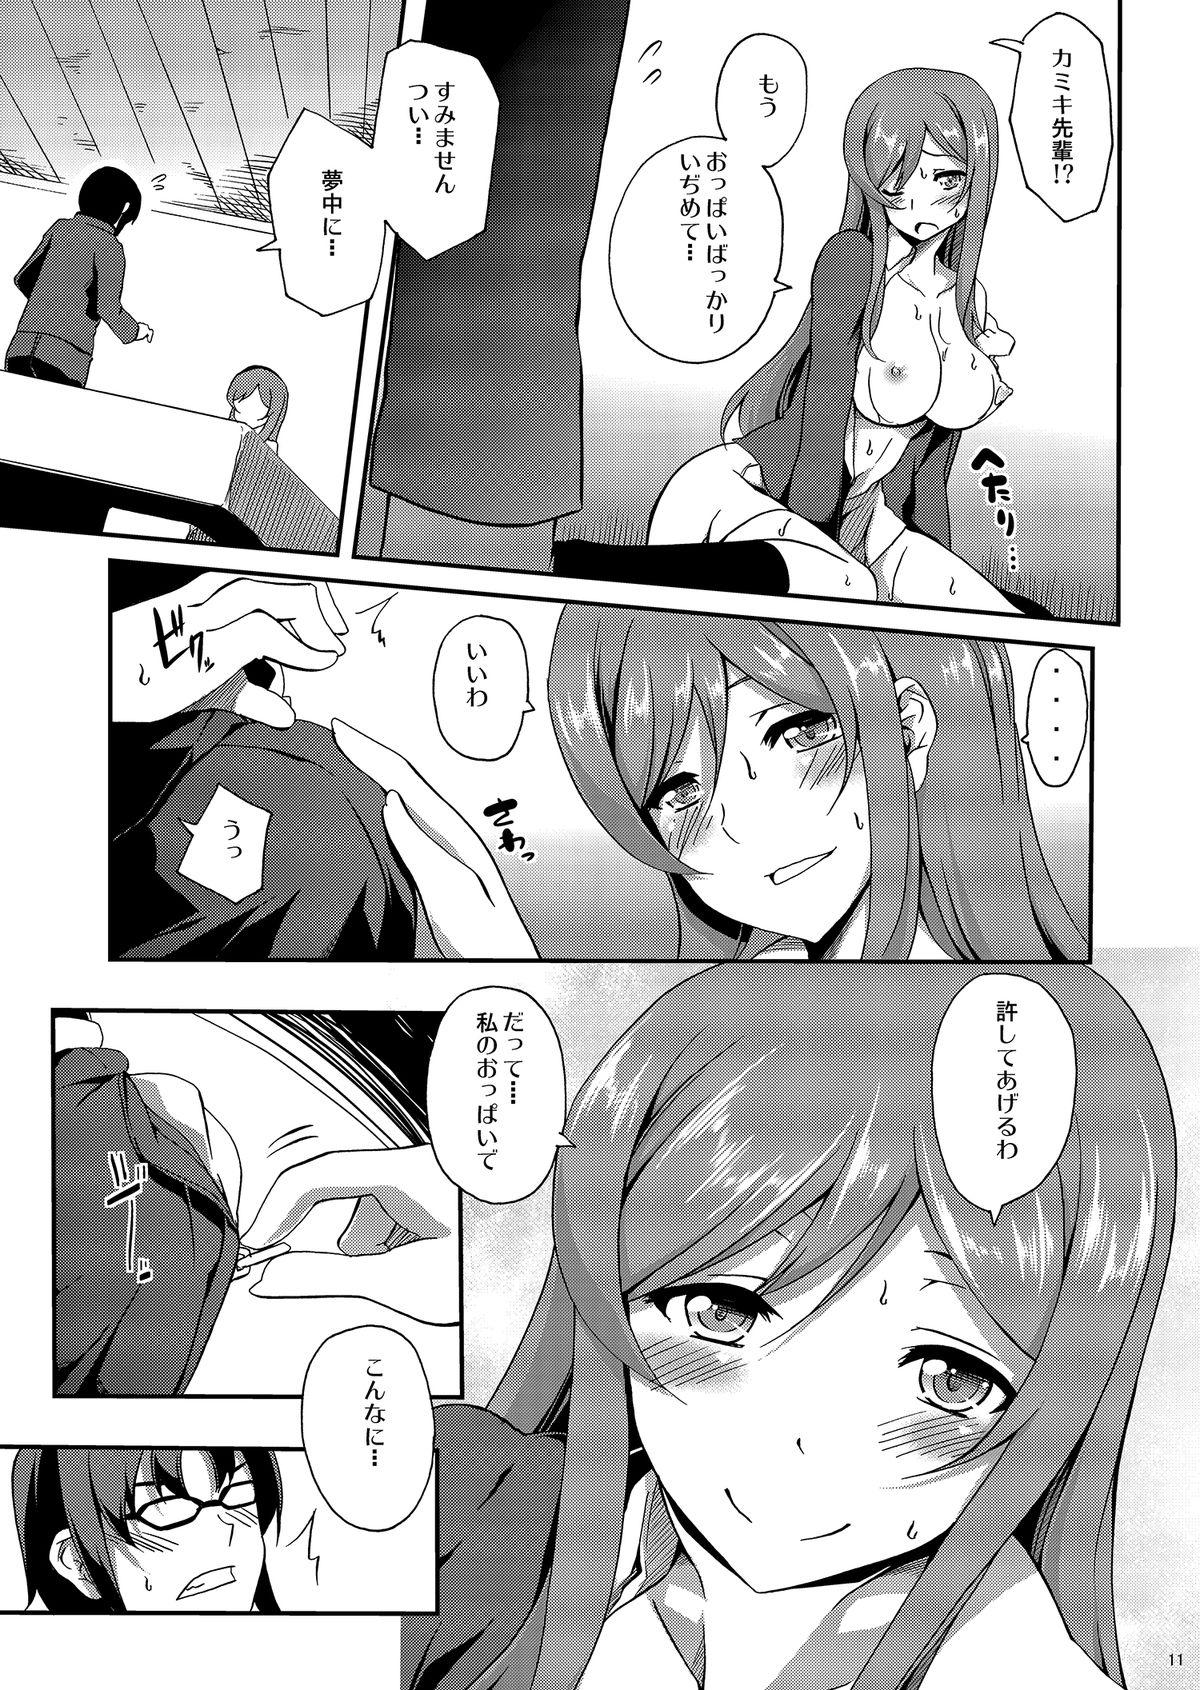 Facials Mirai no Onegai - Gundam build fighters try Hot Cunt - Page 10